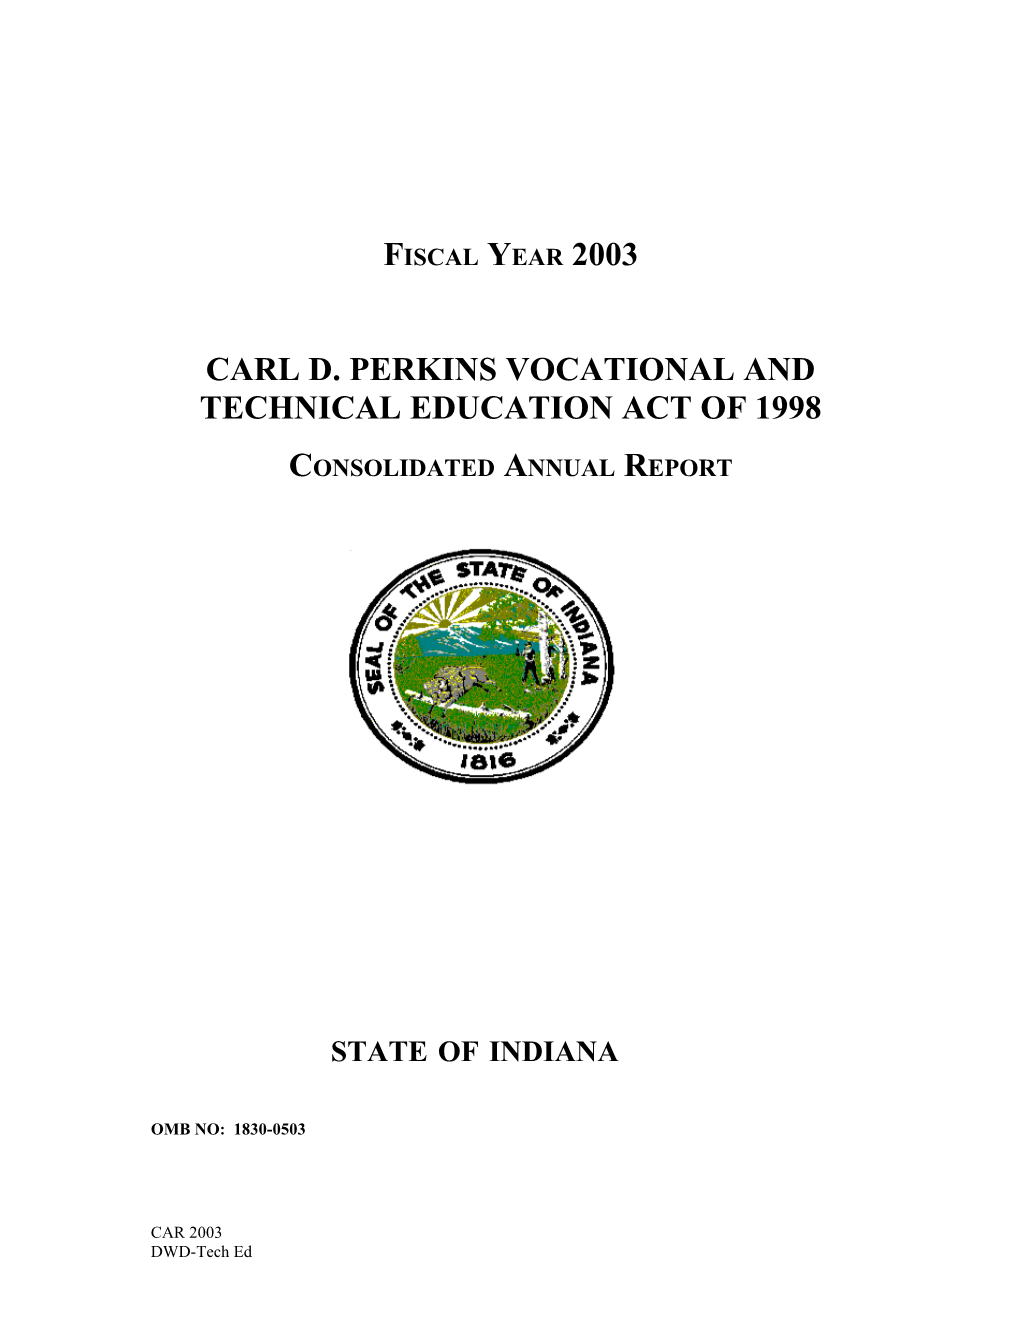 Carl D. Perkins Vocational and Technical Education Act of 1998